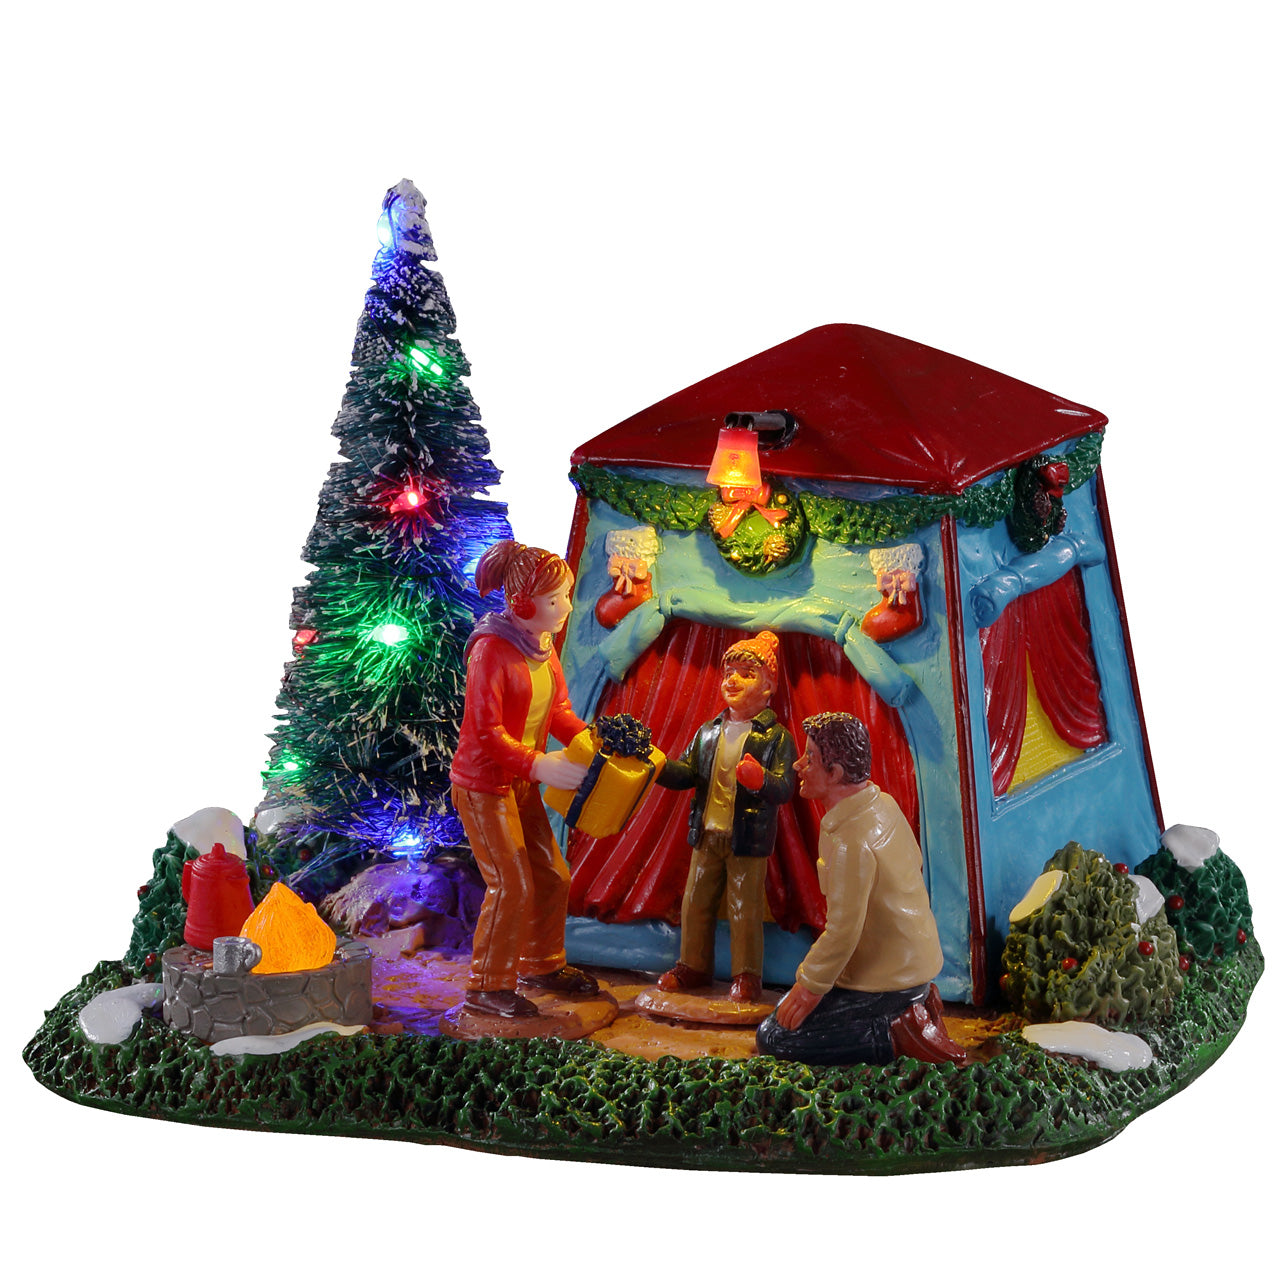 Lemax 14840 The Festive Outdoors